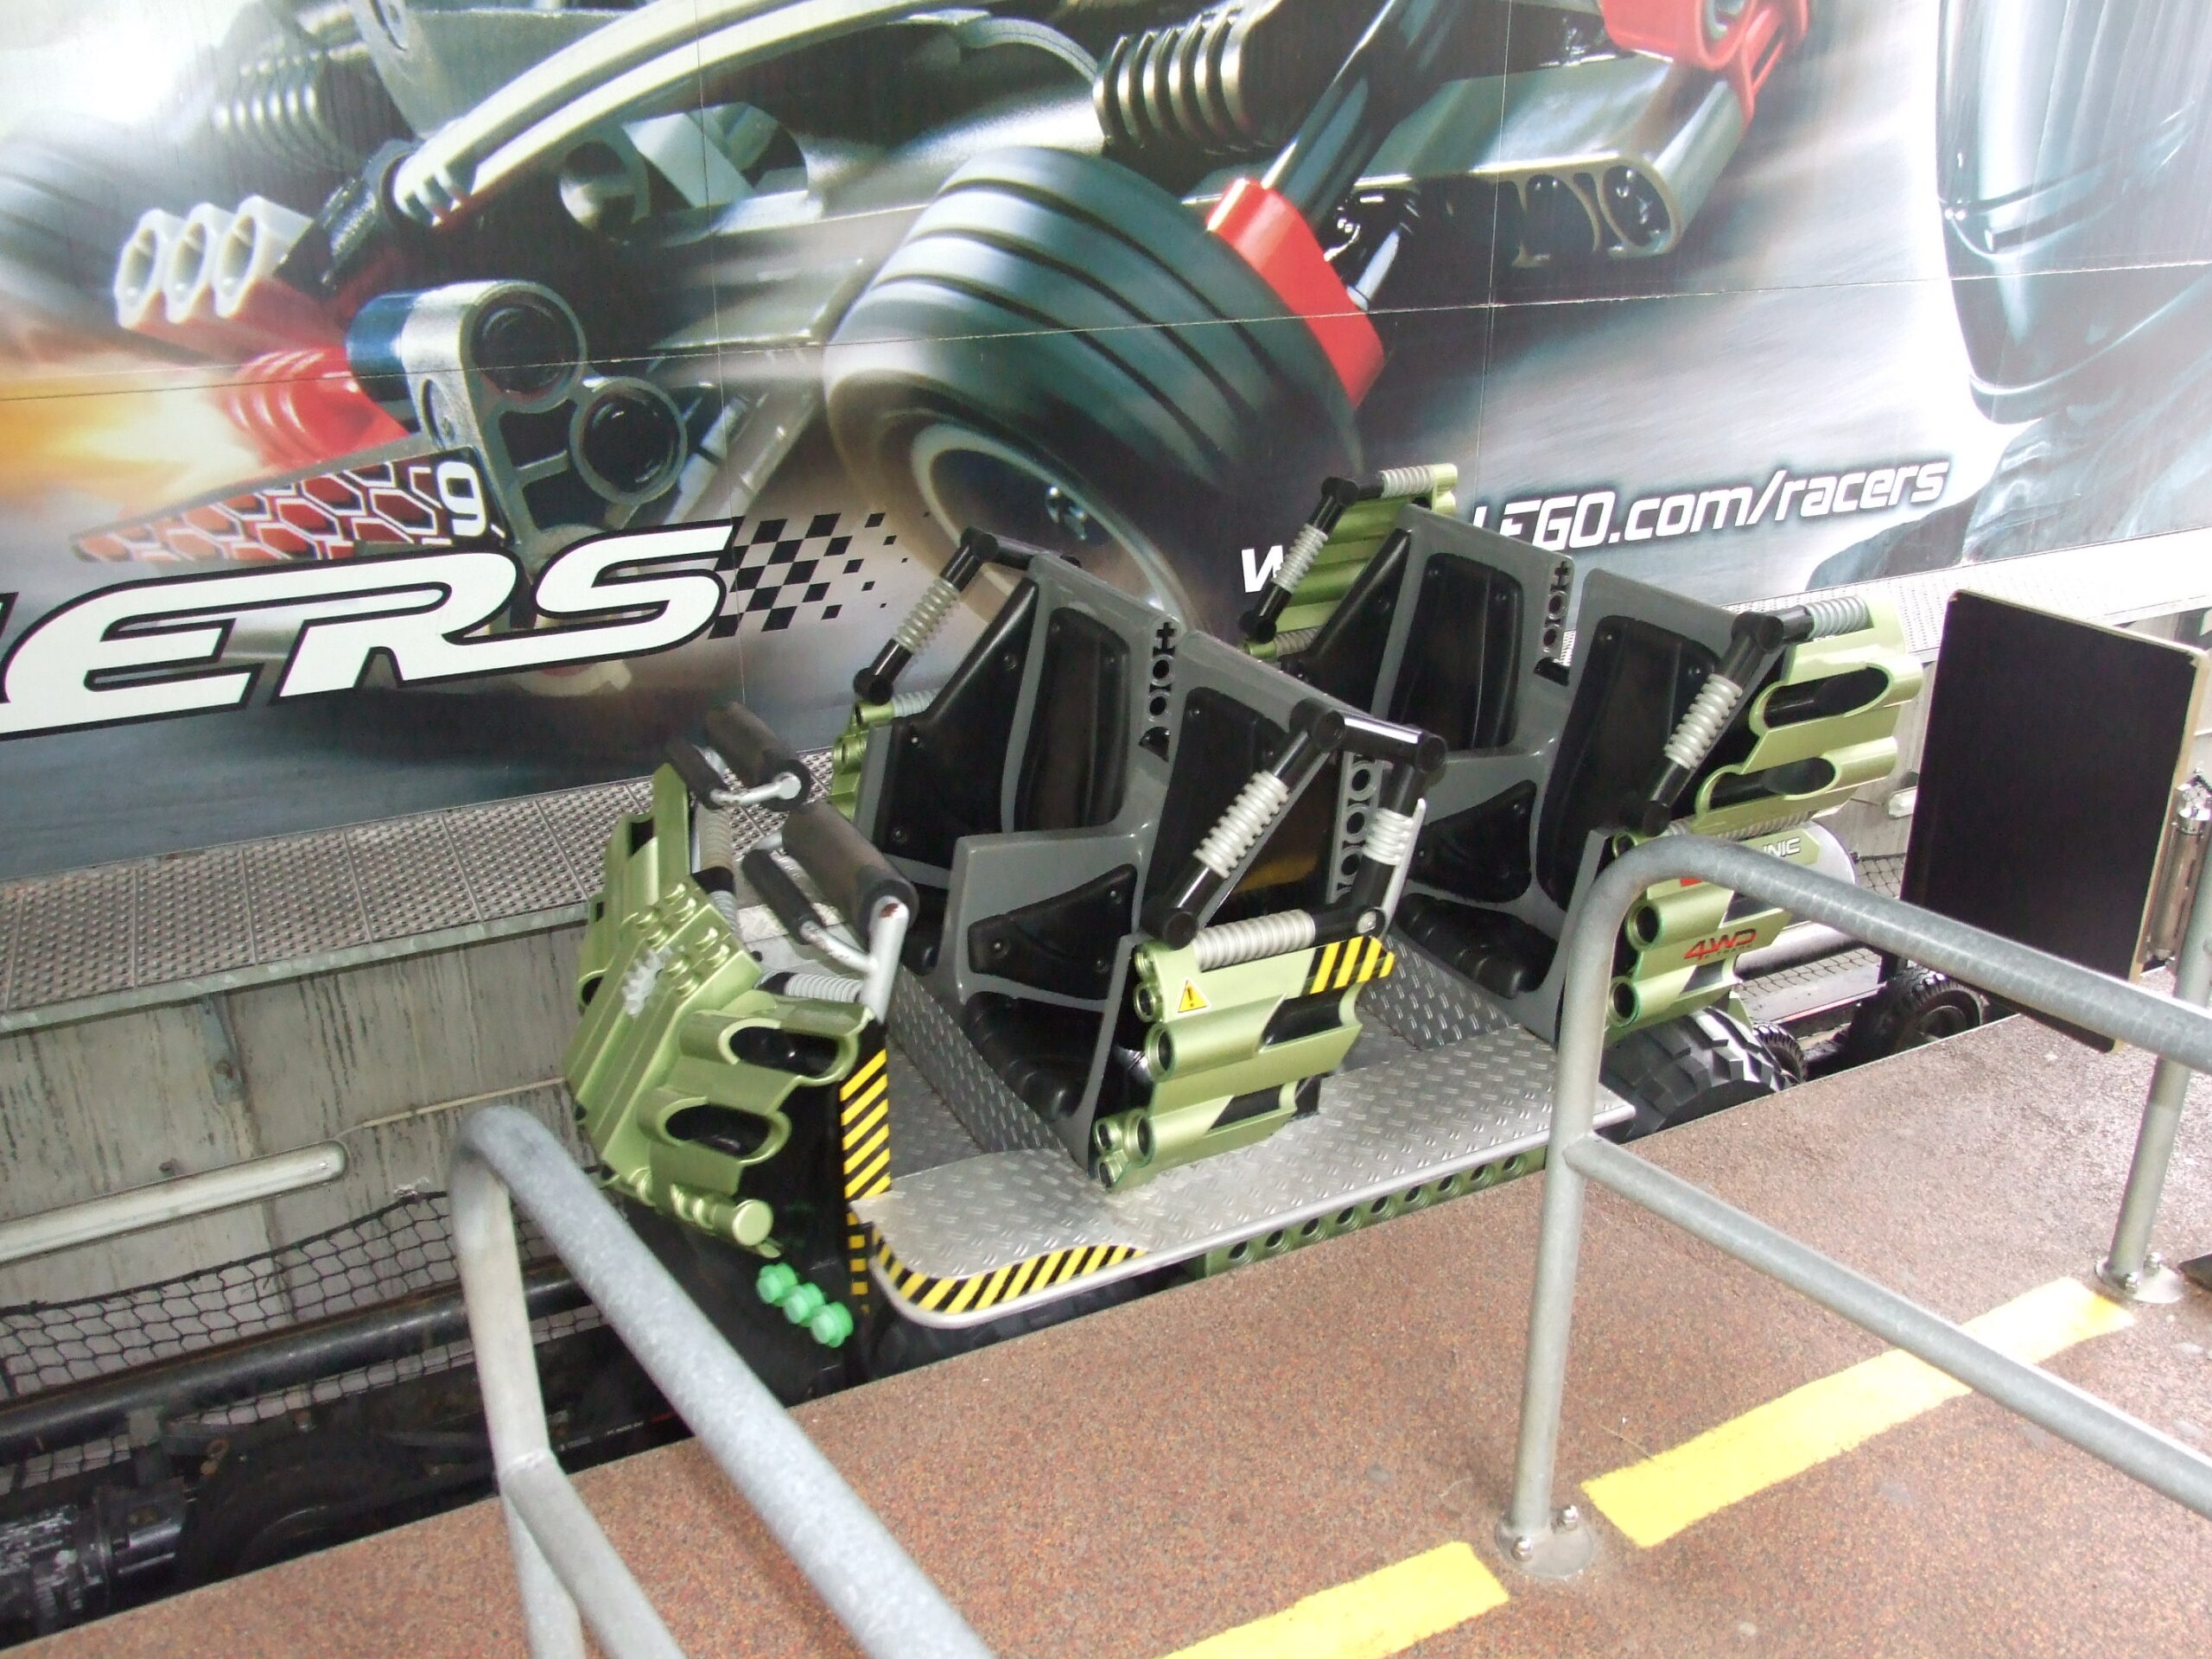 Read more about the article X-treme Racers (Legoland Billund)